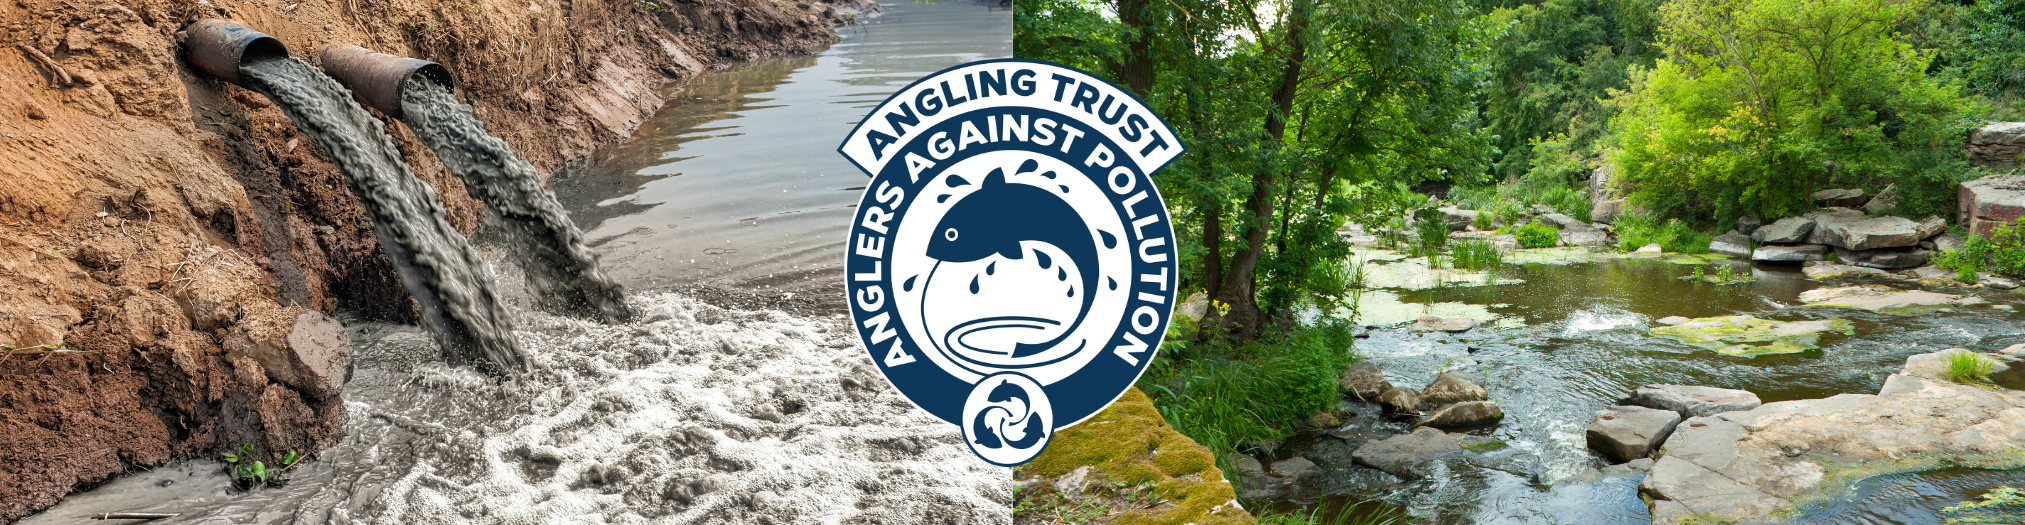 Anglers against pollution